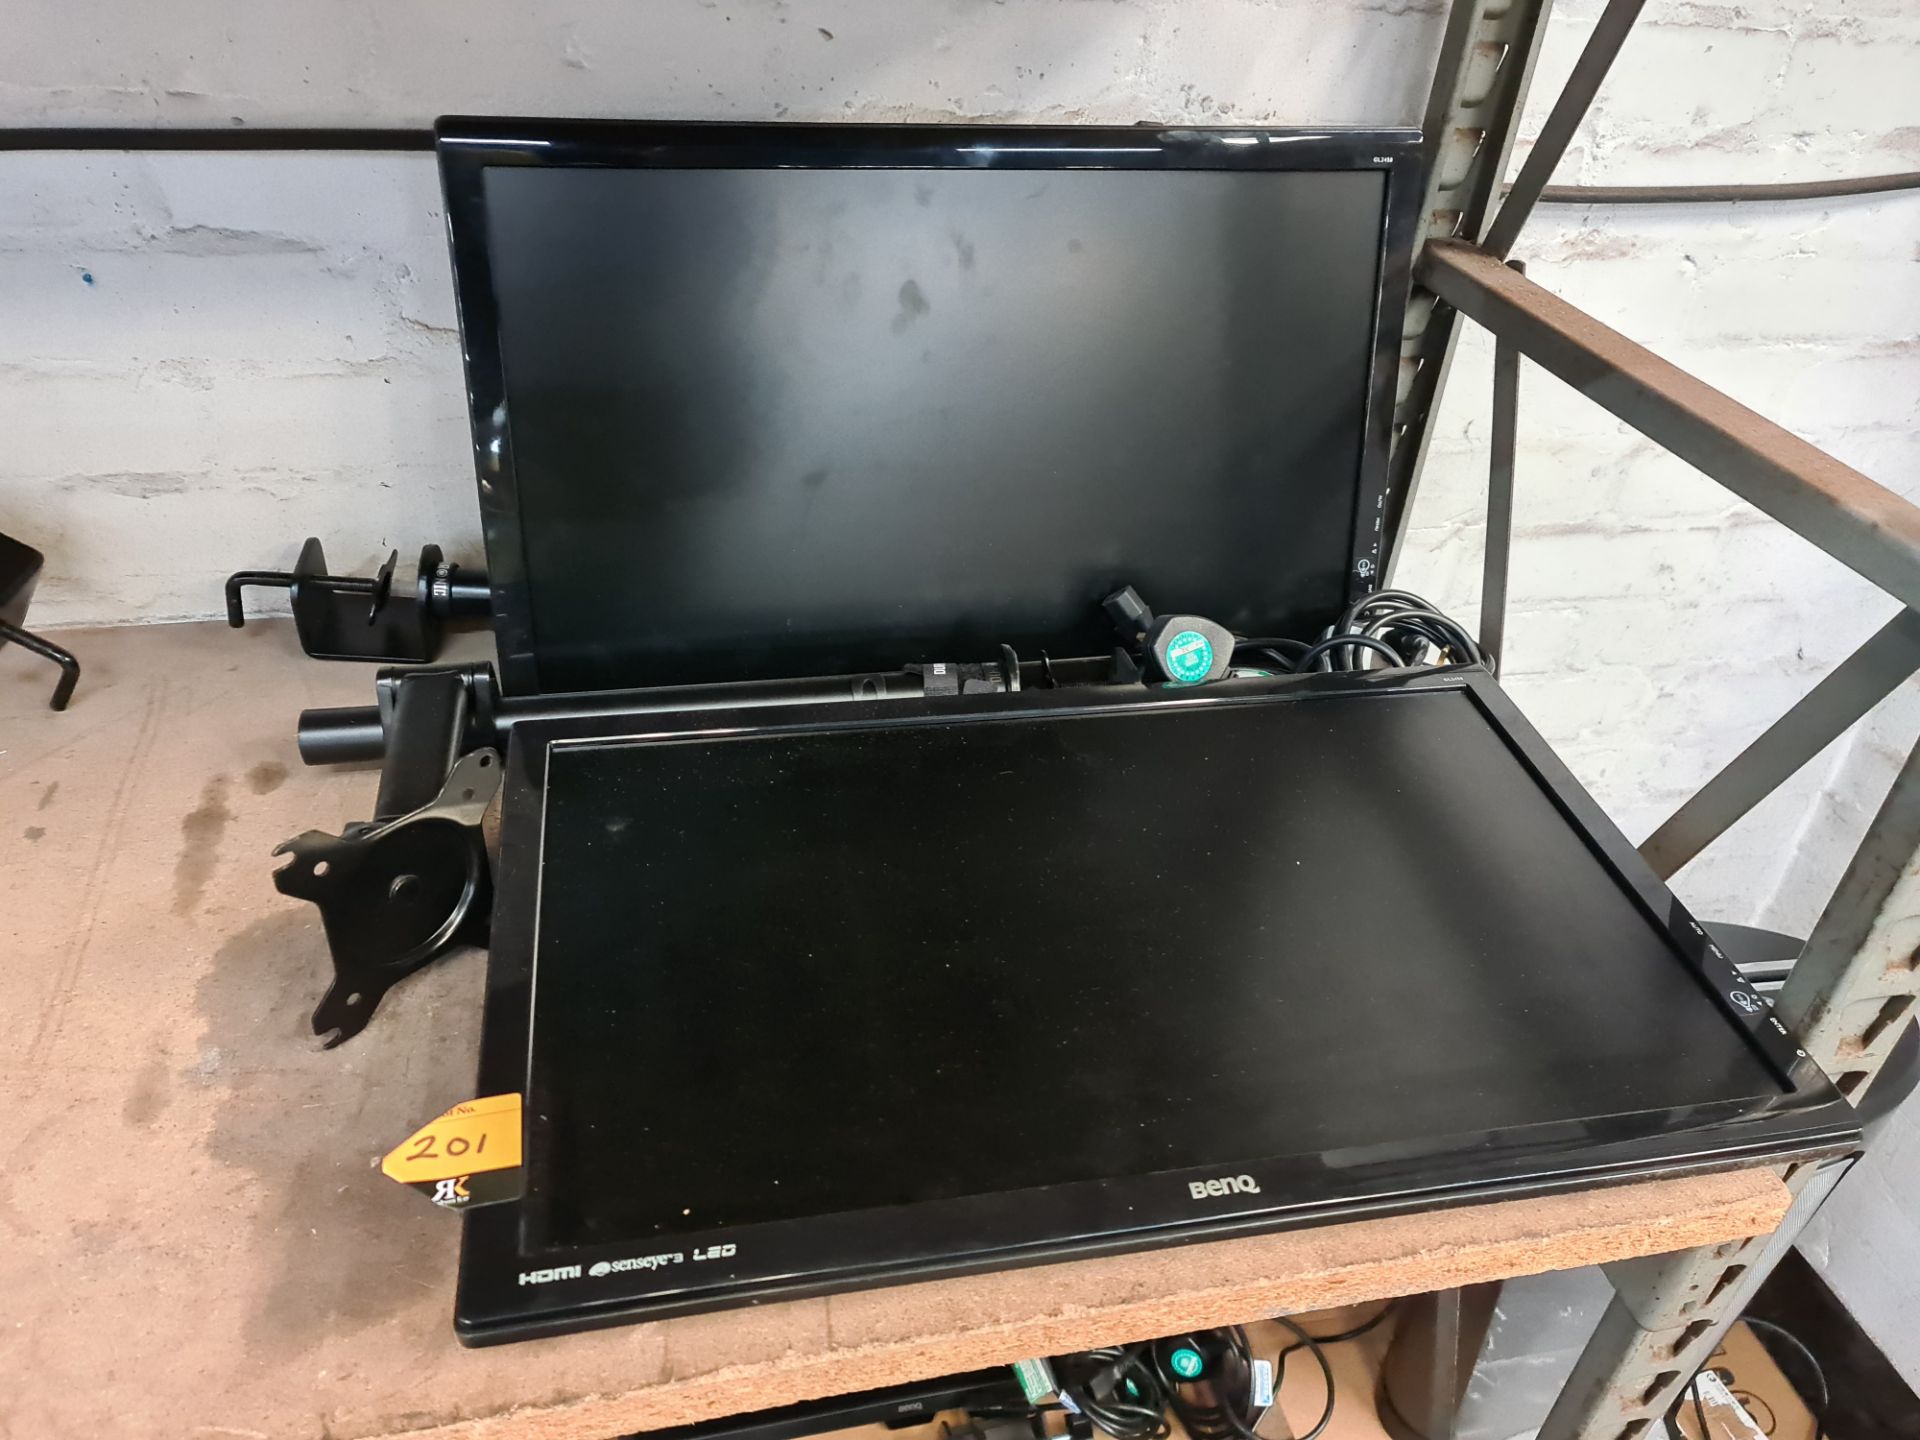 2 off widescreen monitors, each including their own desk mount/bracket